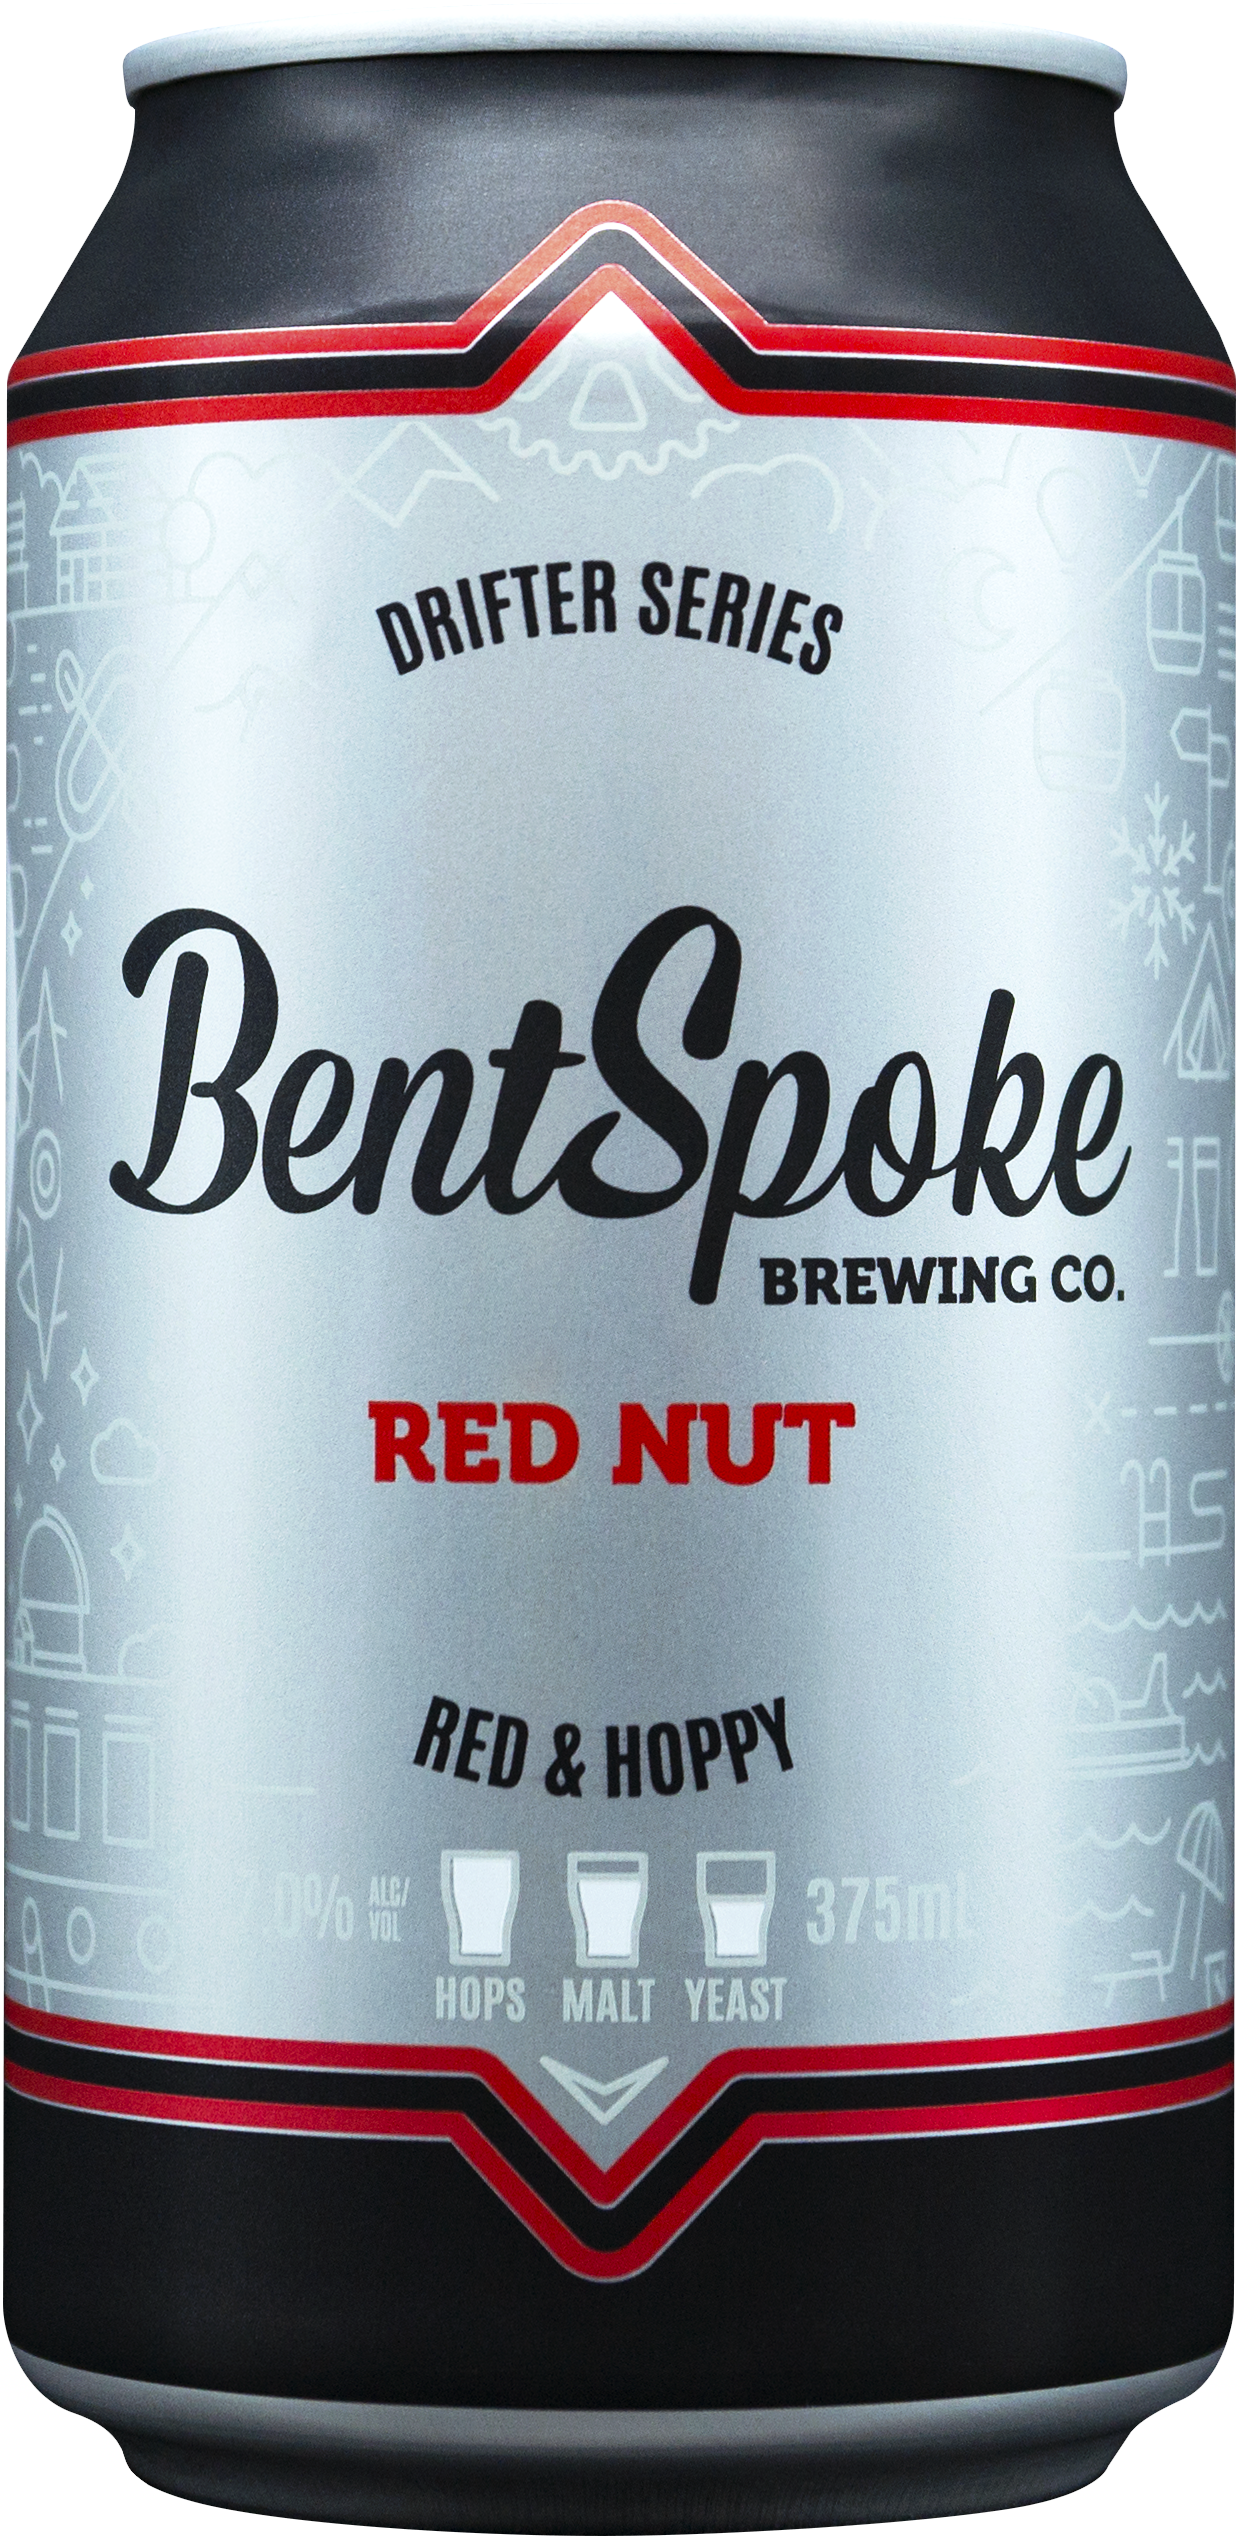 BentSpoke's new Red Nut "Red Hoppy" Red IPA 